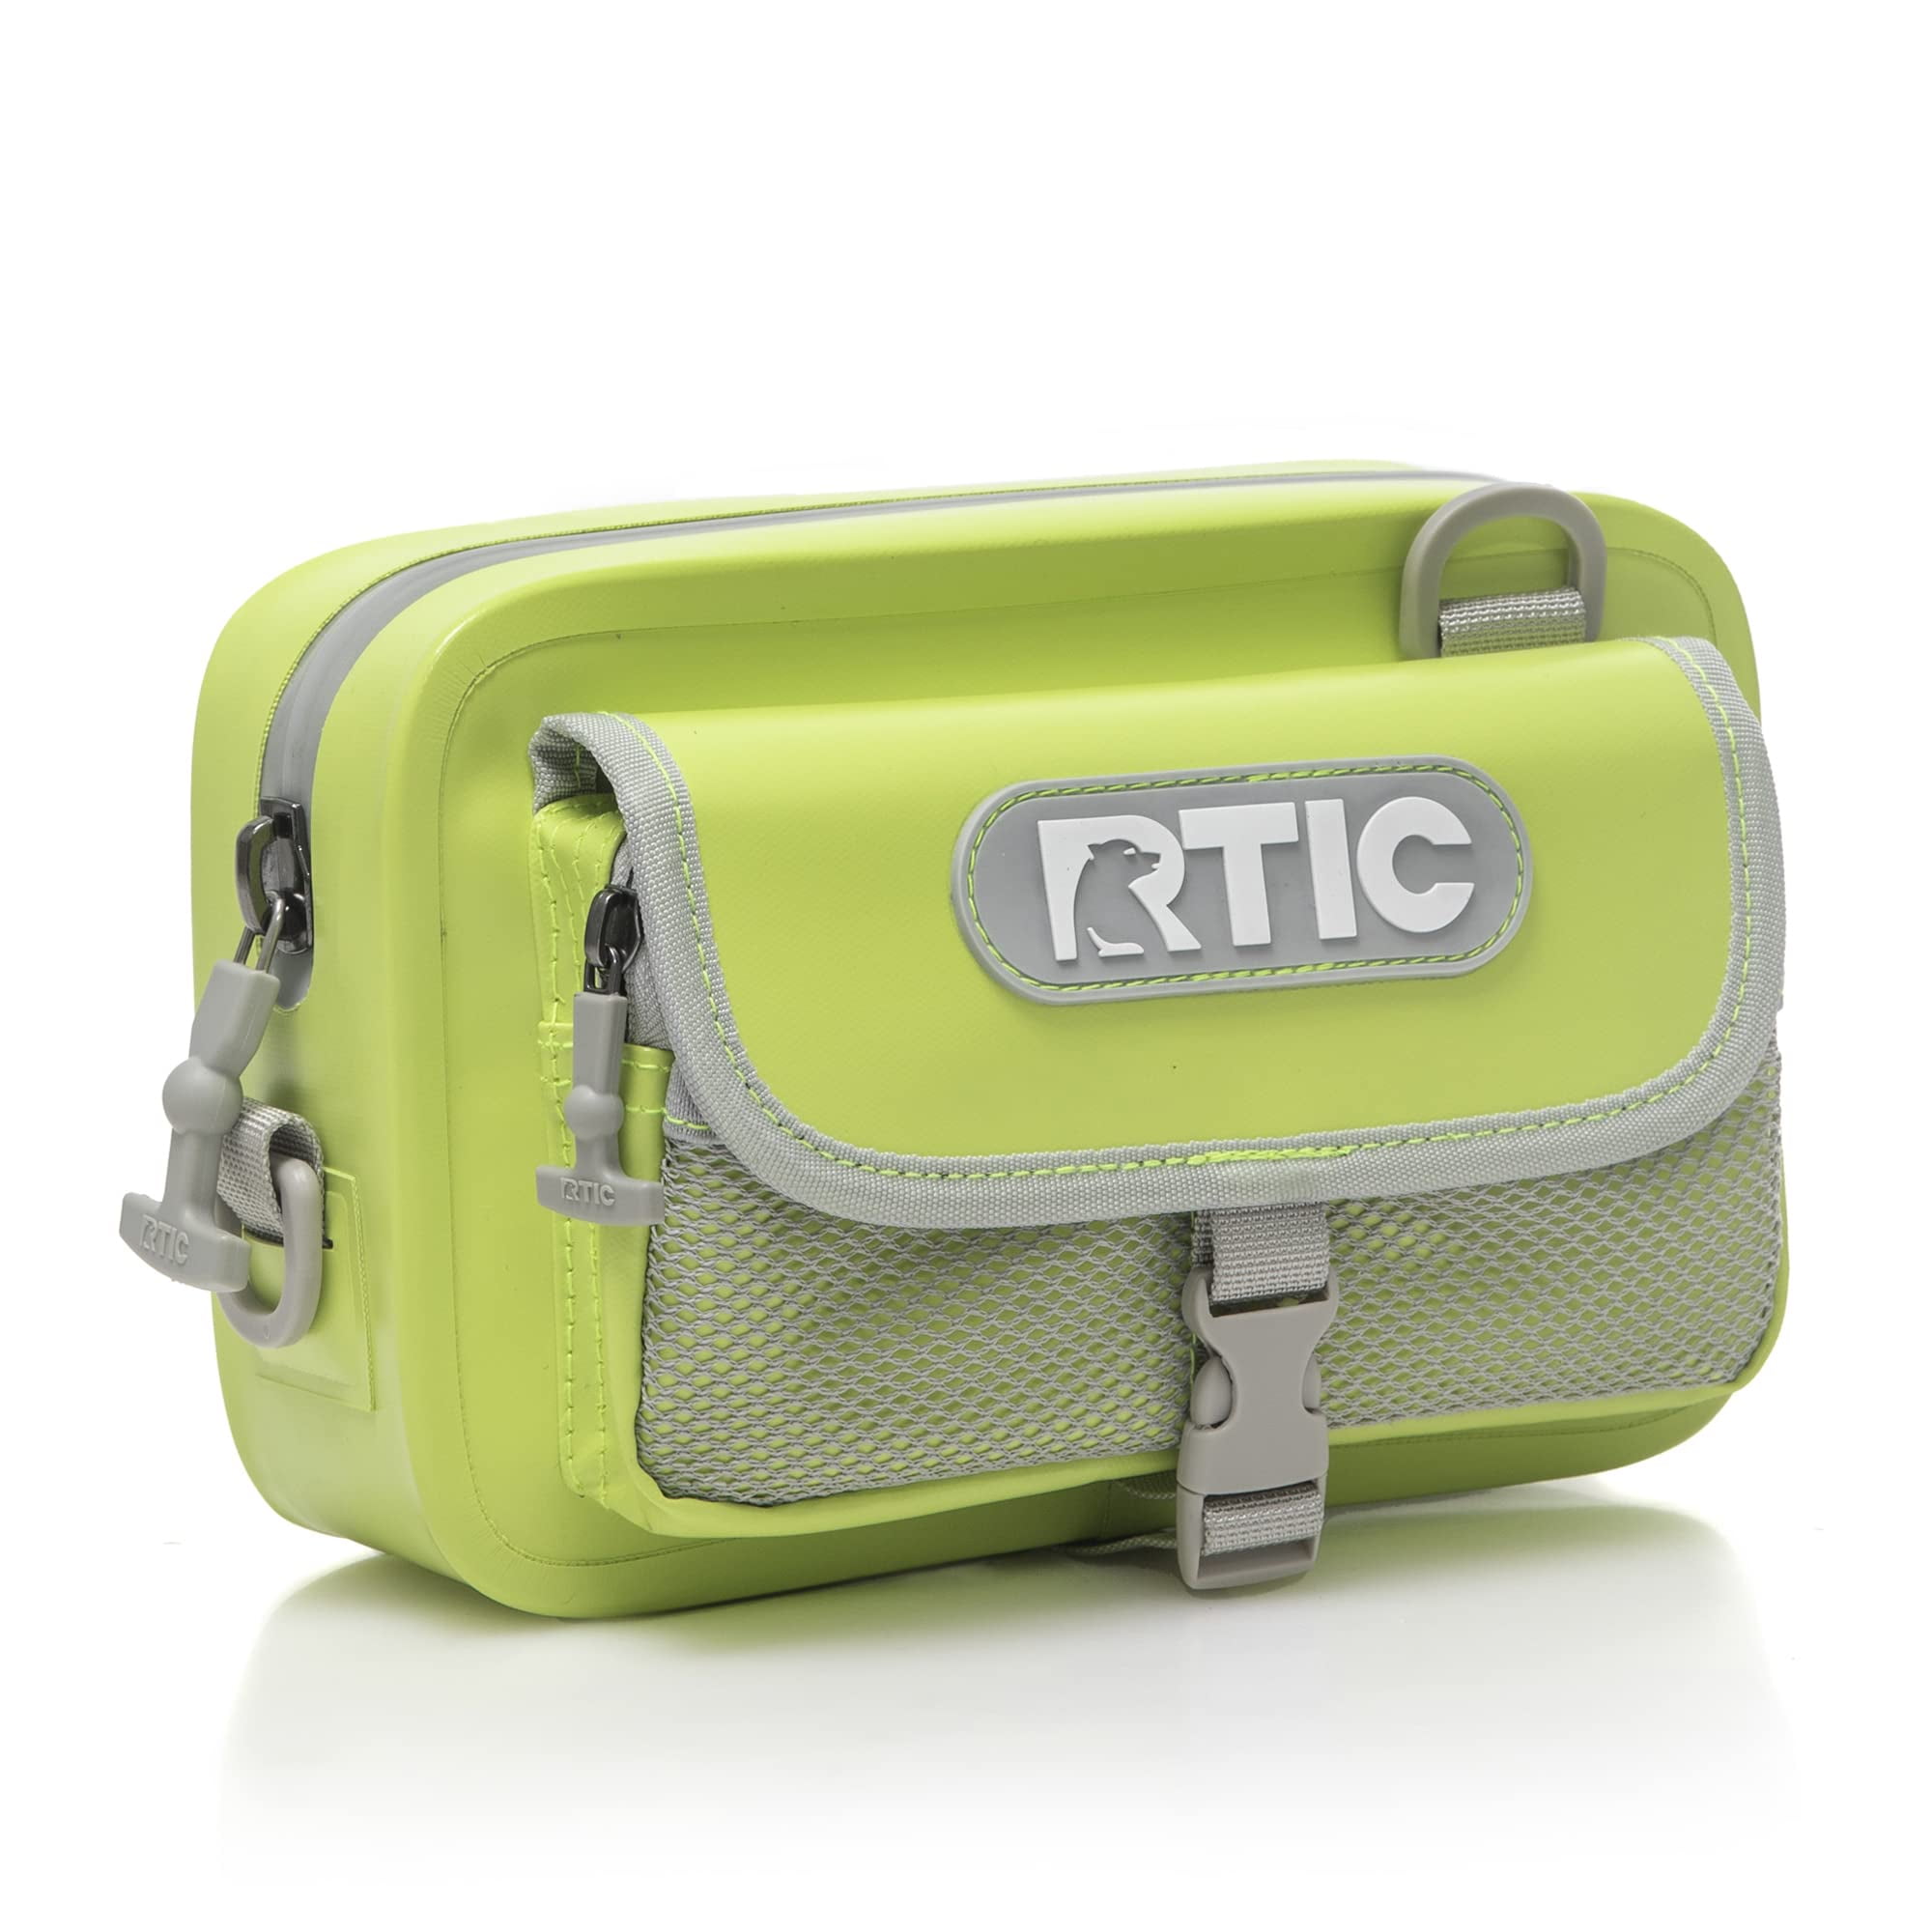 RTIC SidePack Deluxe Small Waterproof Bag Pouch for Beach, Pool